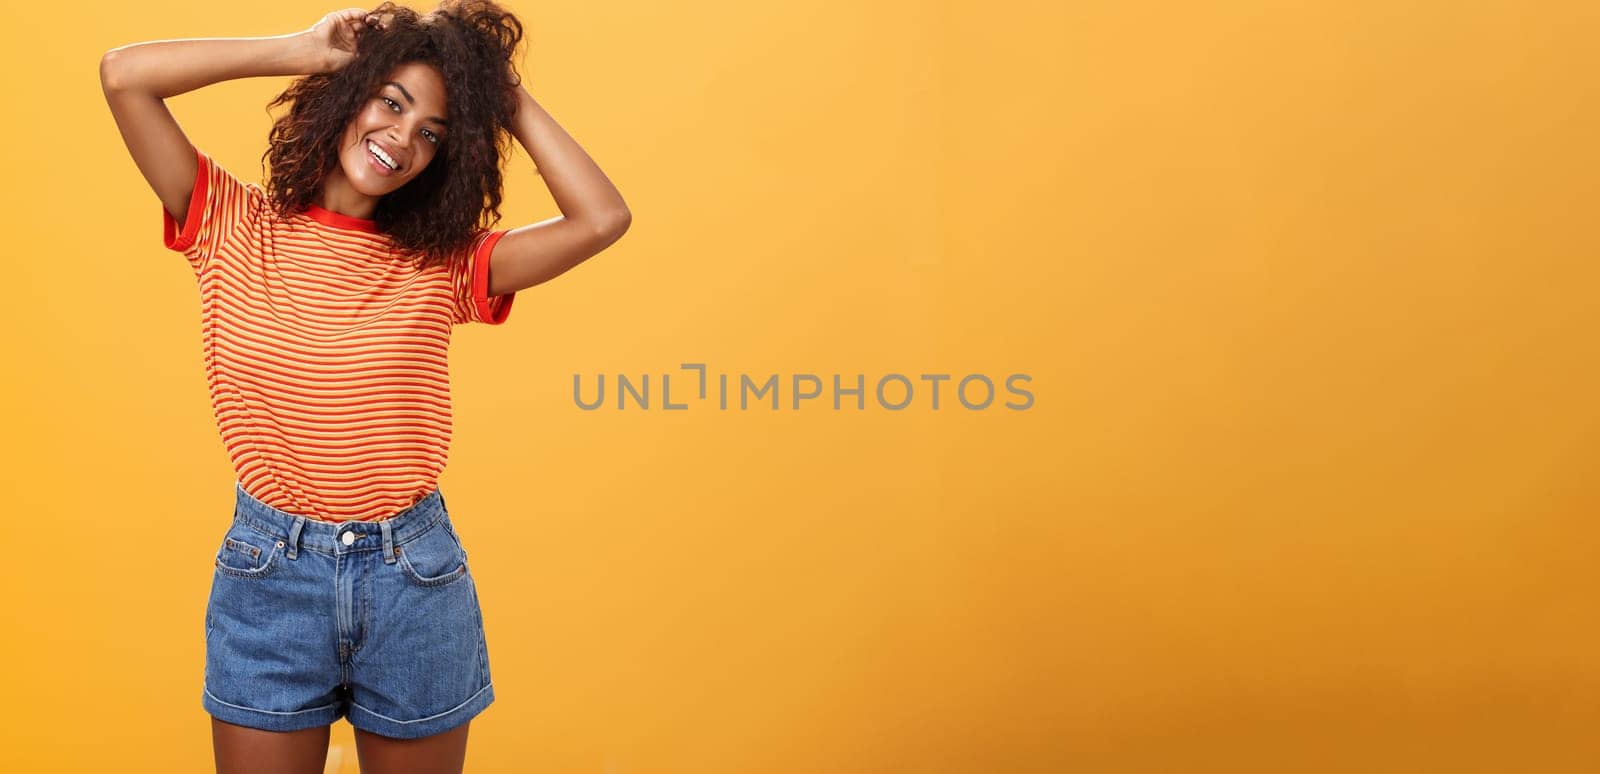 Time start living life fullest. Joyful optimistic woman having fun during vacation tilting head touching curly hair and enjoying summer sunshine in trendy striped t-shirt and shorts over orange wall by Benzoix